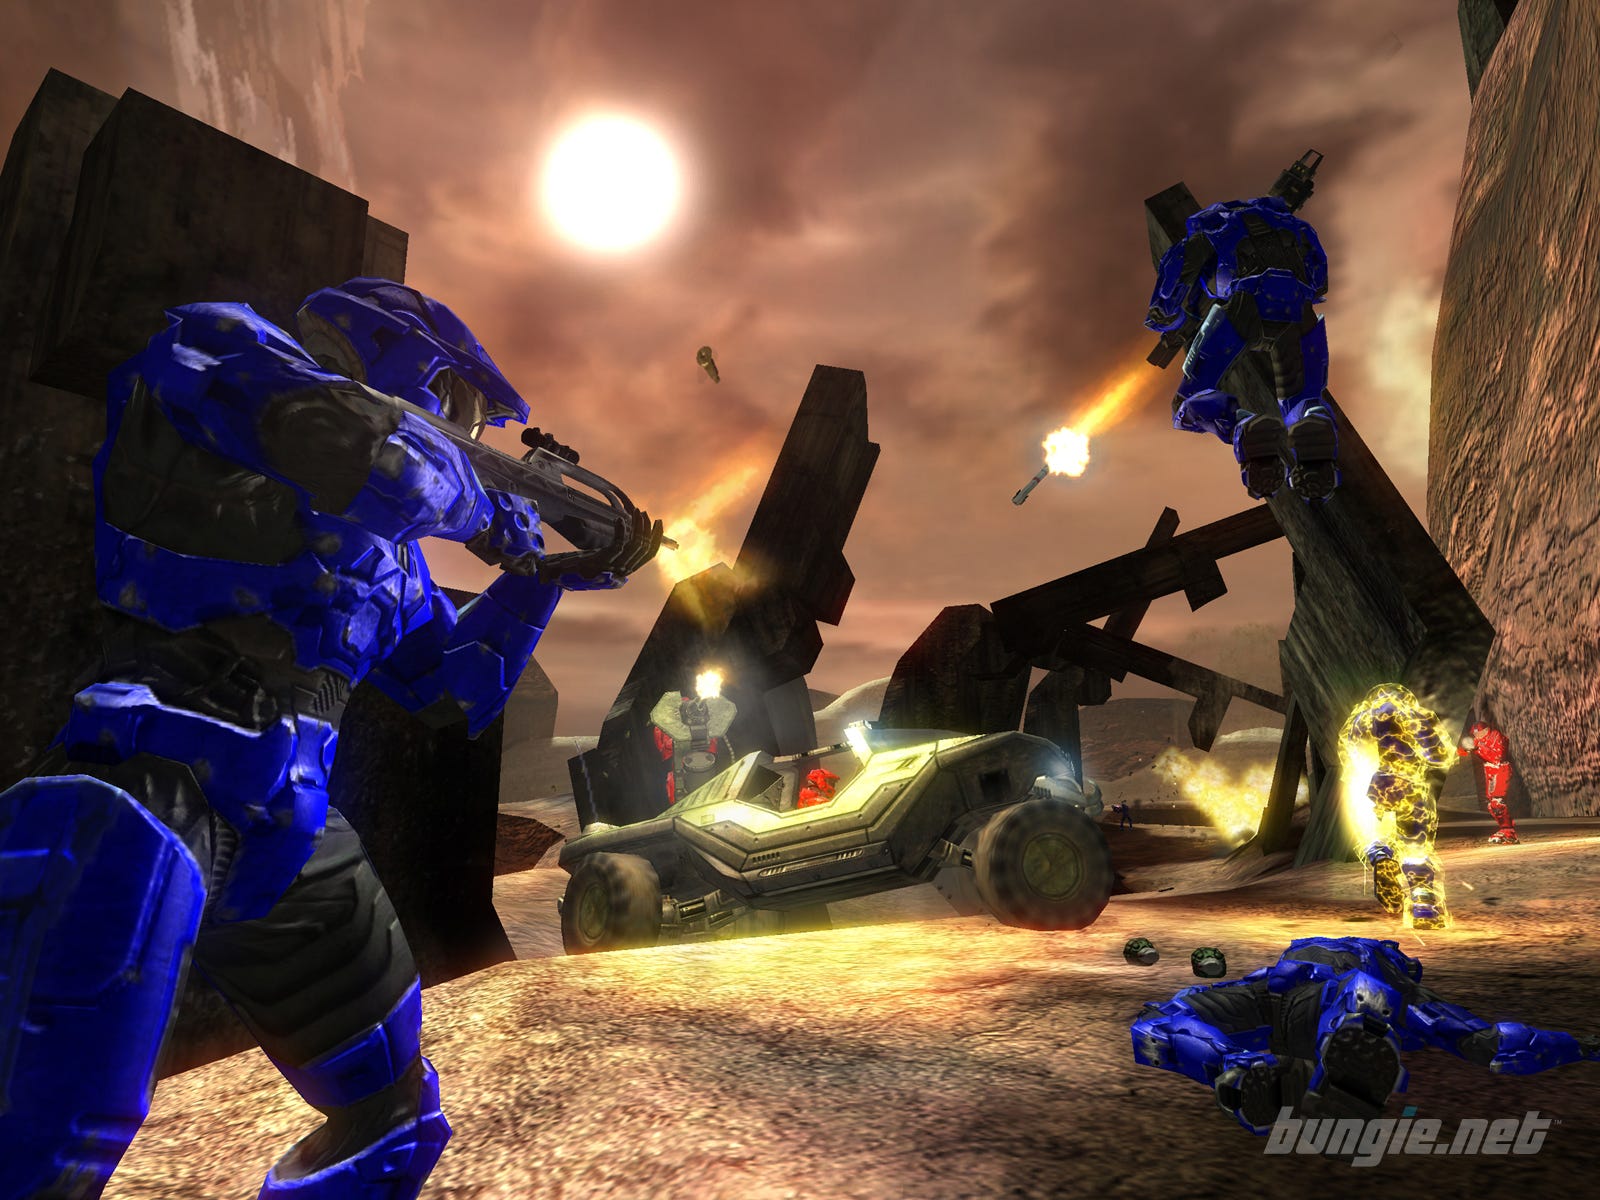  Halo 2 covenant Brute w/ brute shoot : Toys & Games